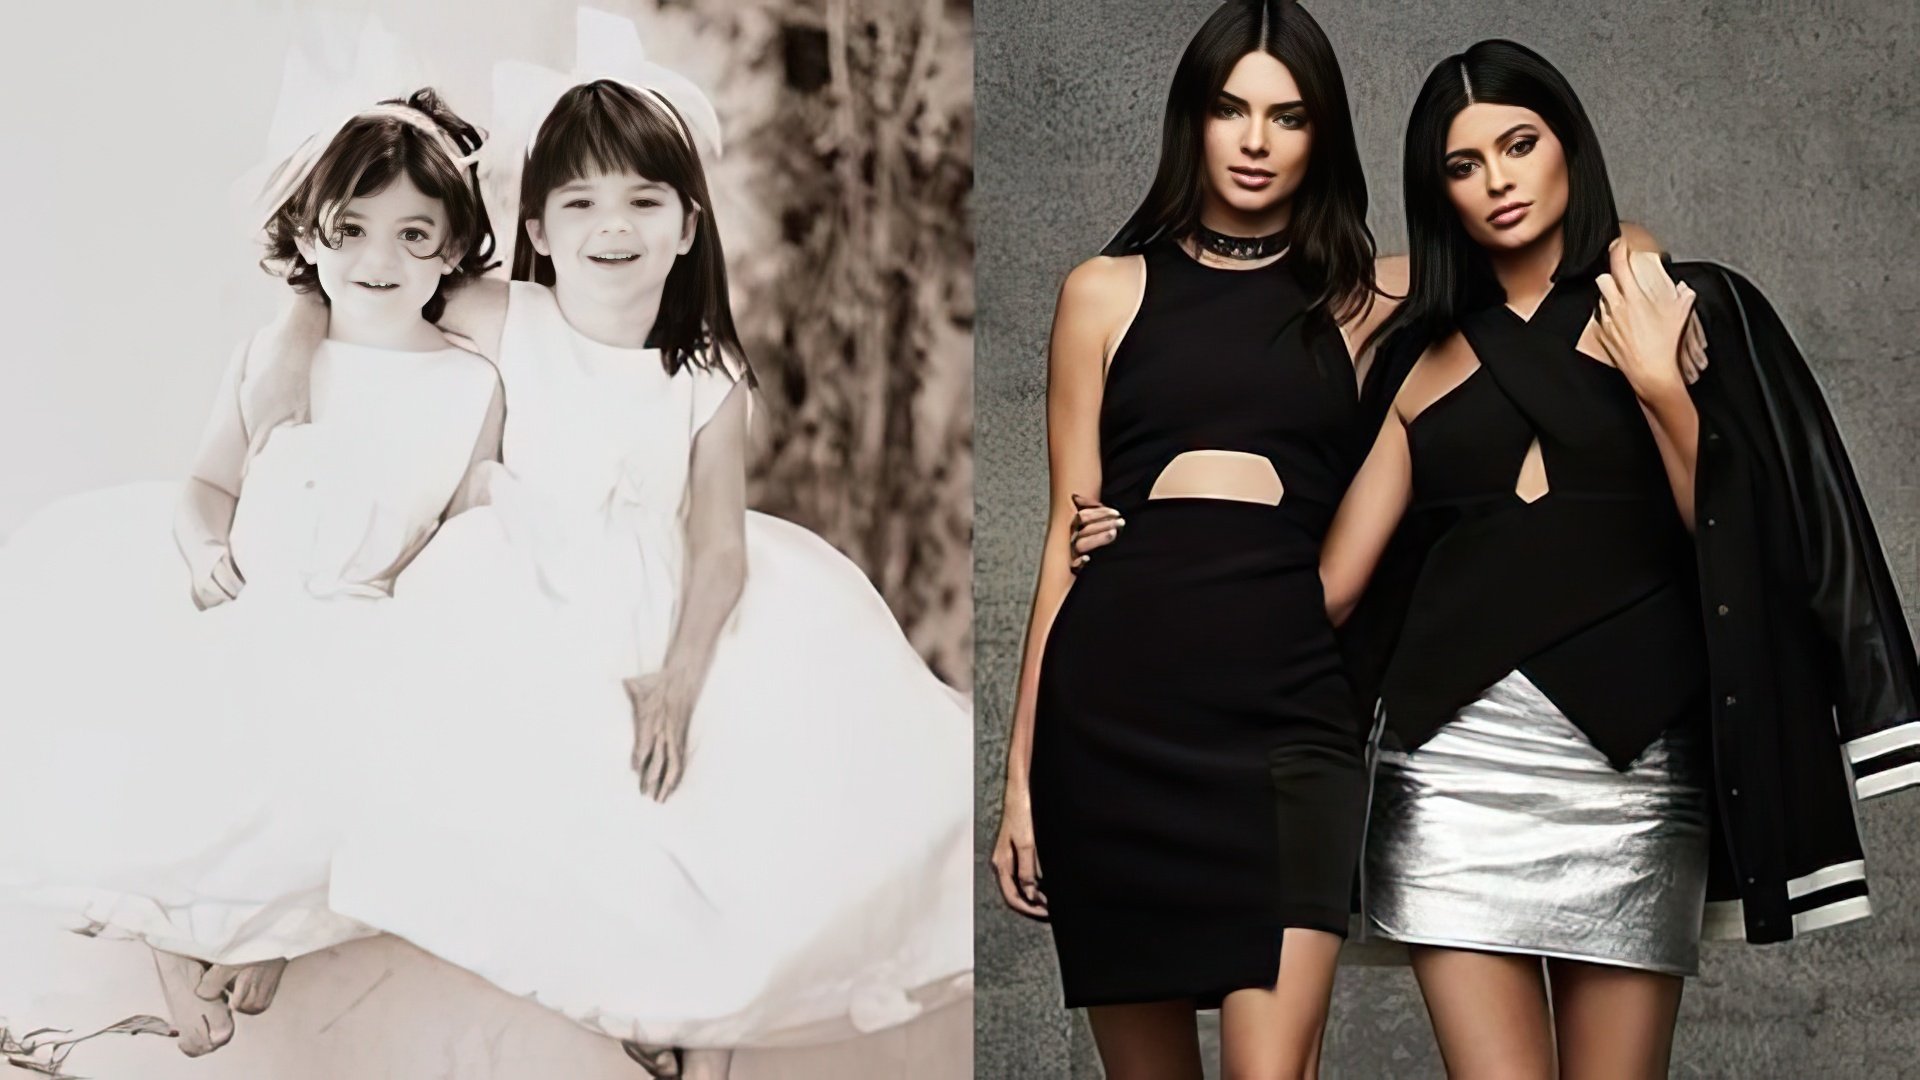 Kylie and Kendall Jenner in childhood and now